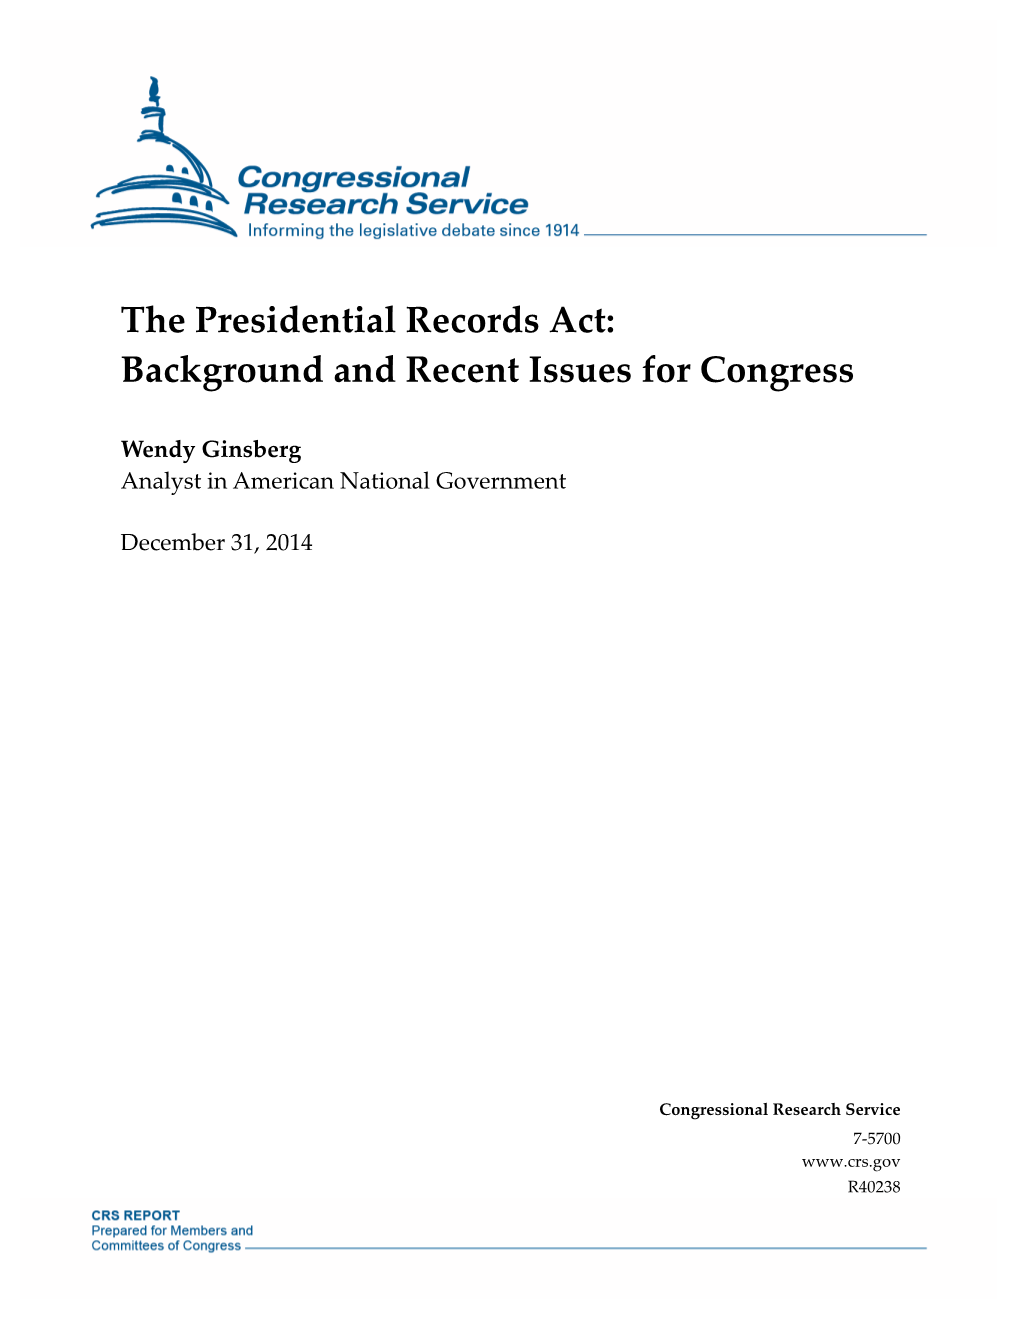 The Presidential Records Act: Background and Recent Issues for Congress